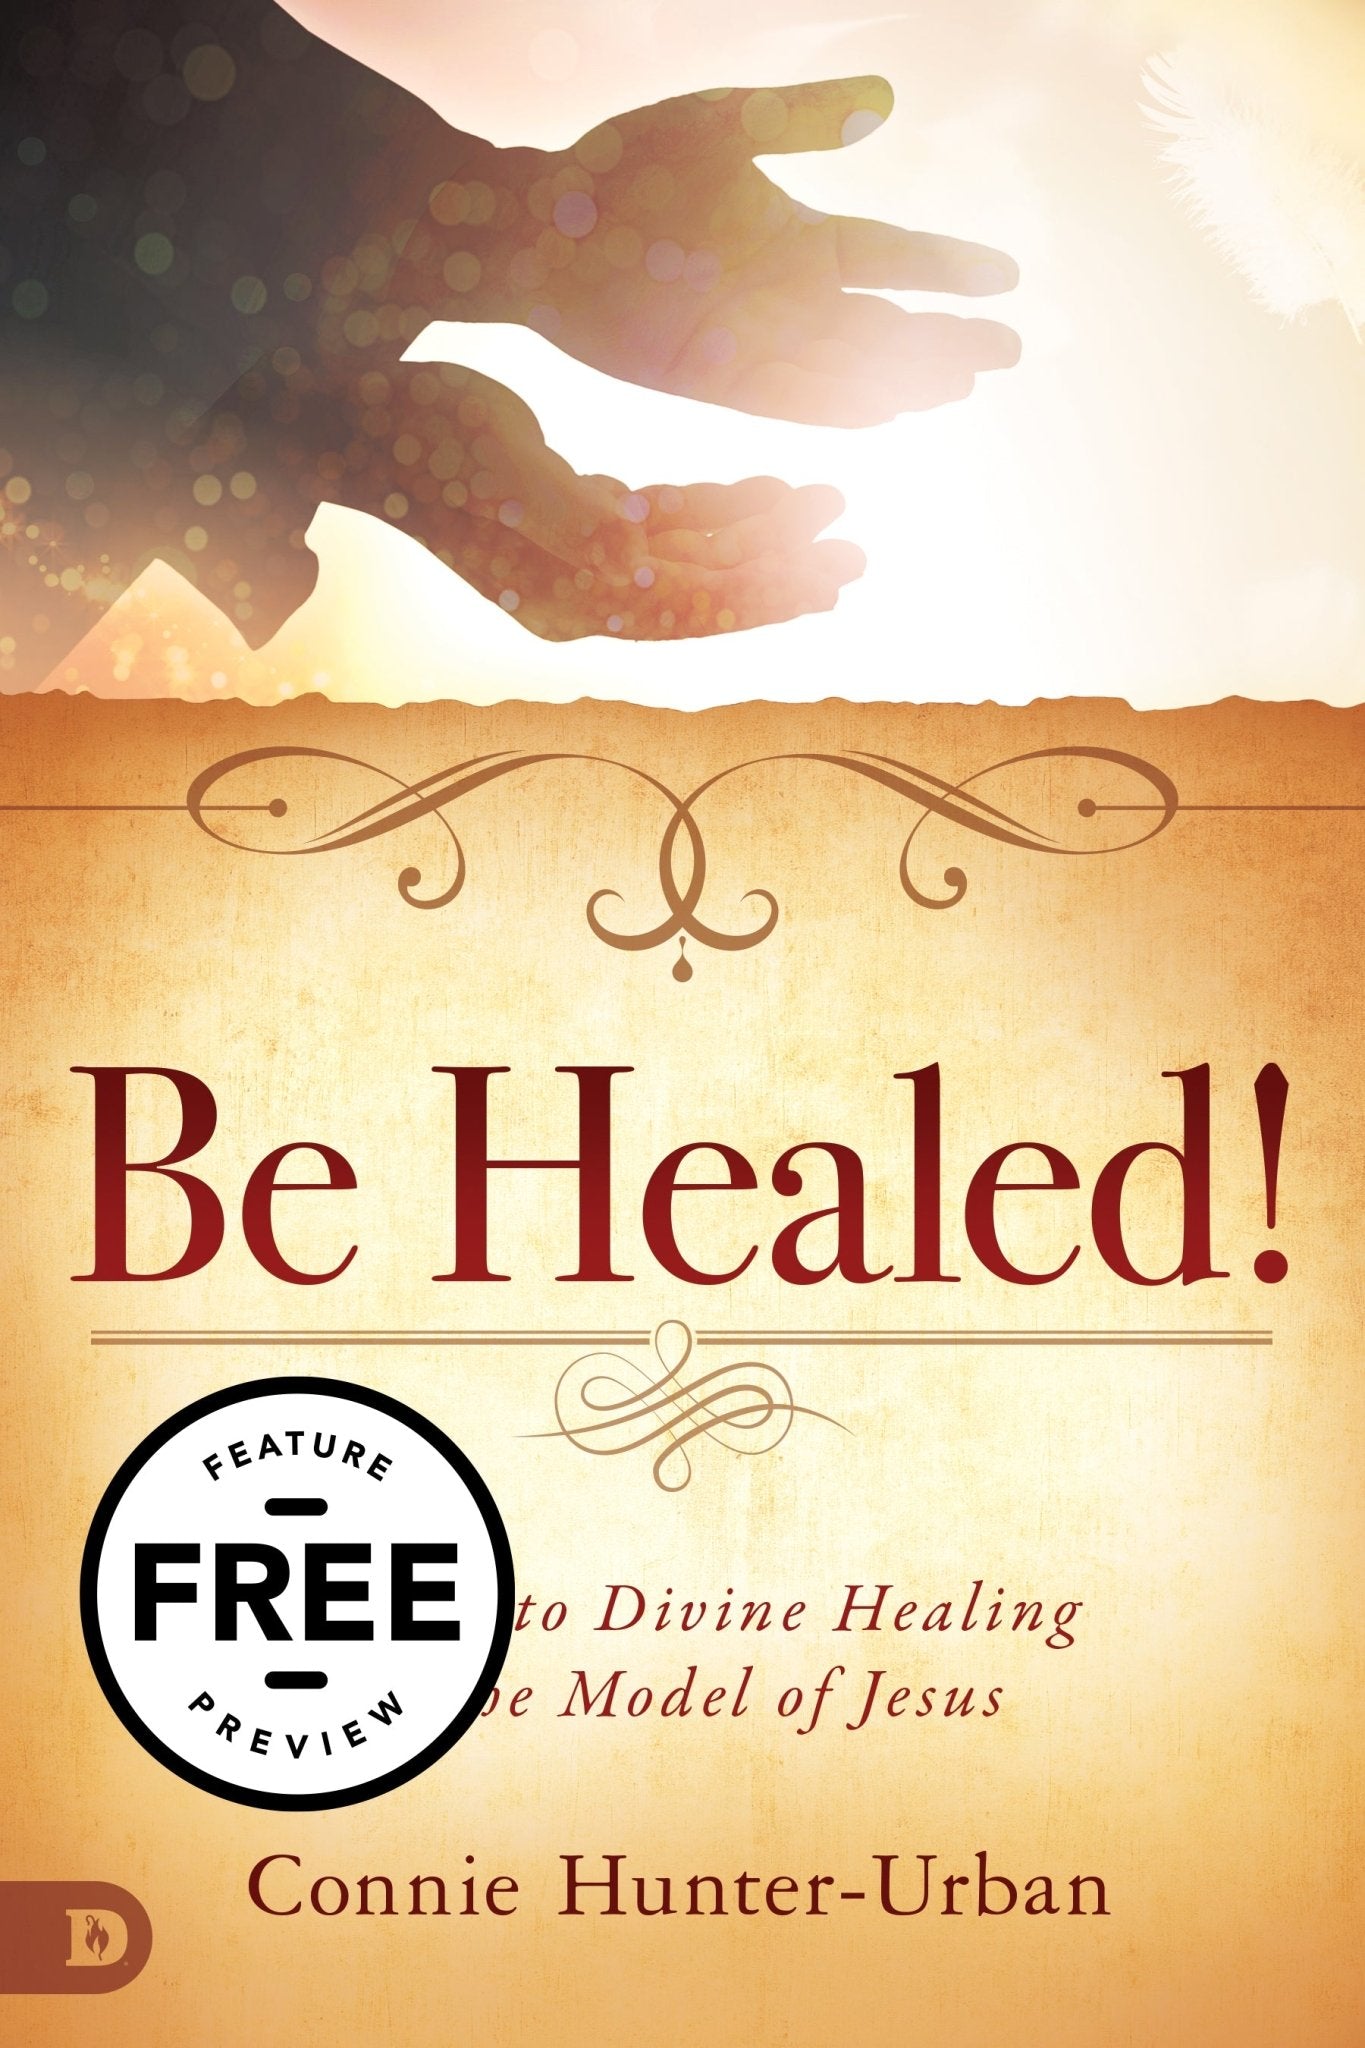 Be Healed!: Secrets to Divine Healing in the Model of Jesus Feature Message (PDF Download)